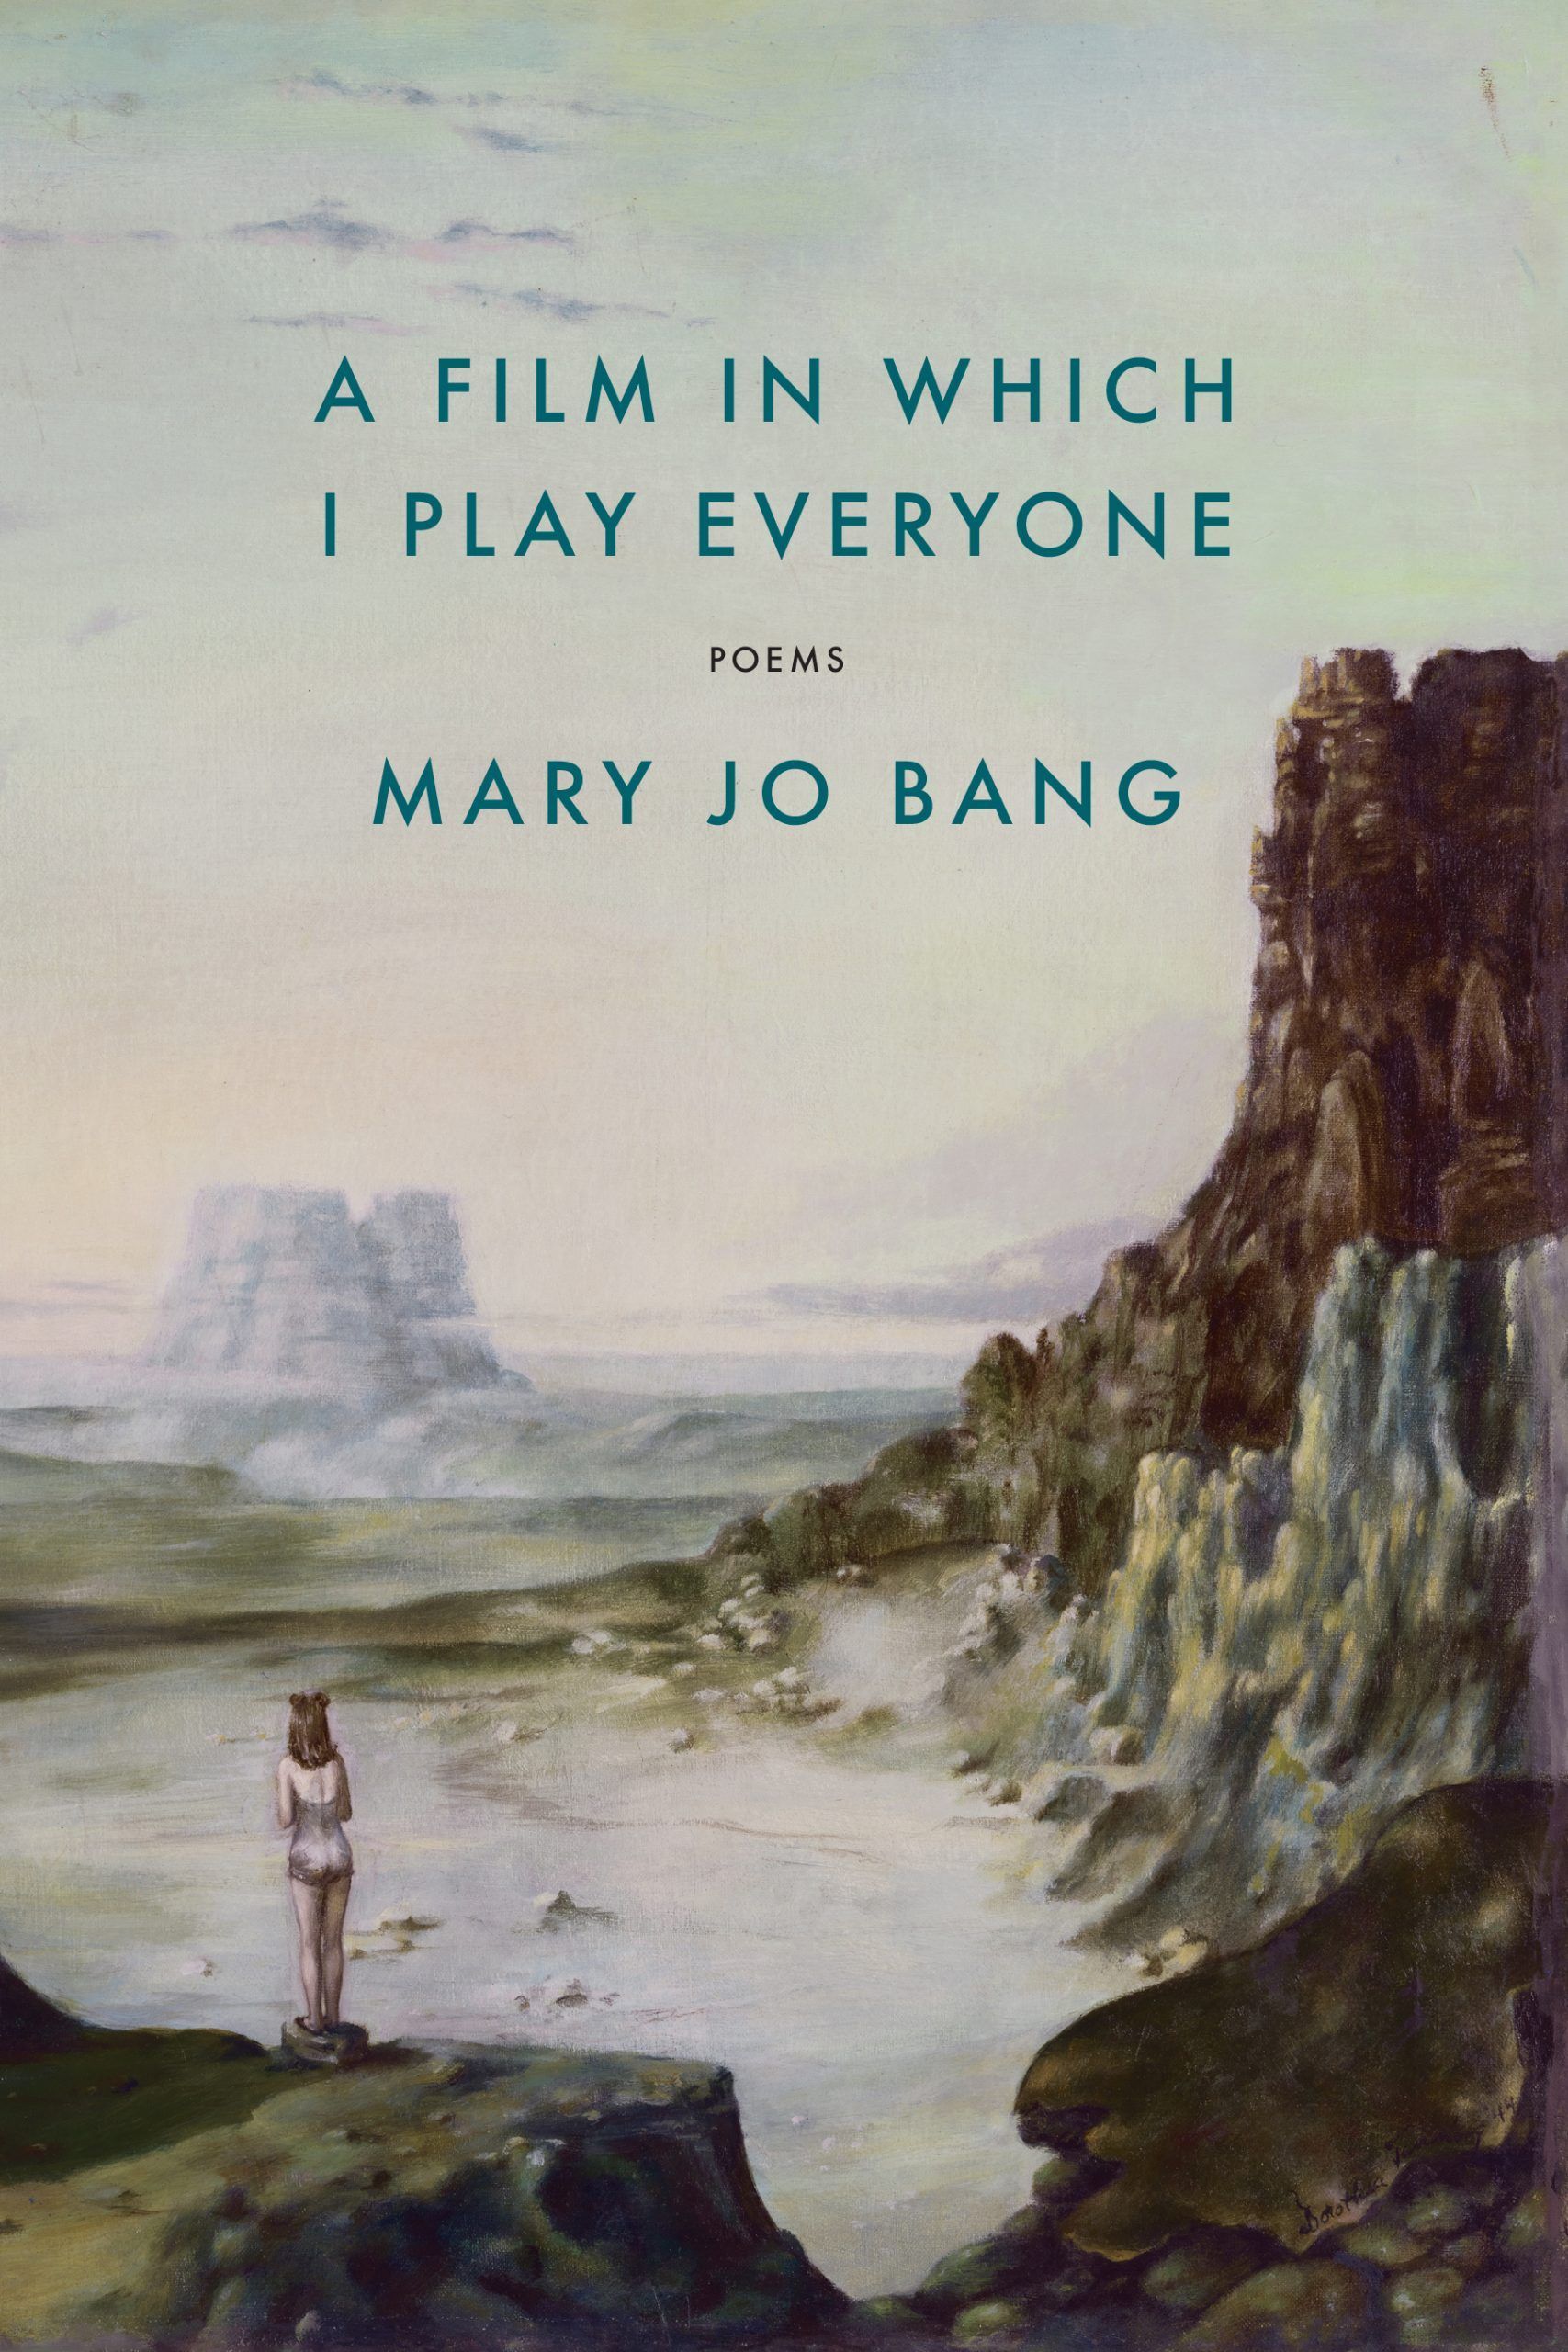 Trying On a New Self: On Mary Jo Bang’s “A Film in Which I Play Everyone”